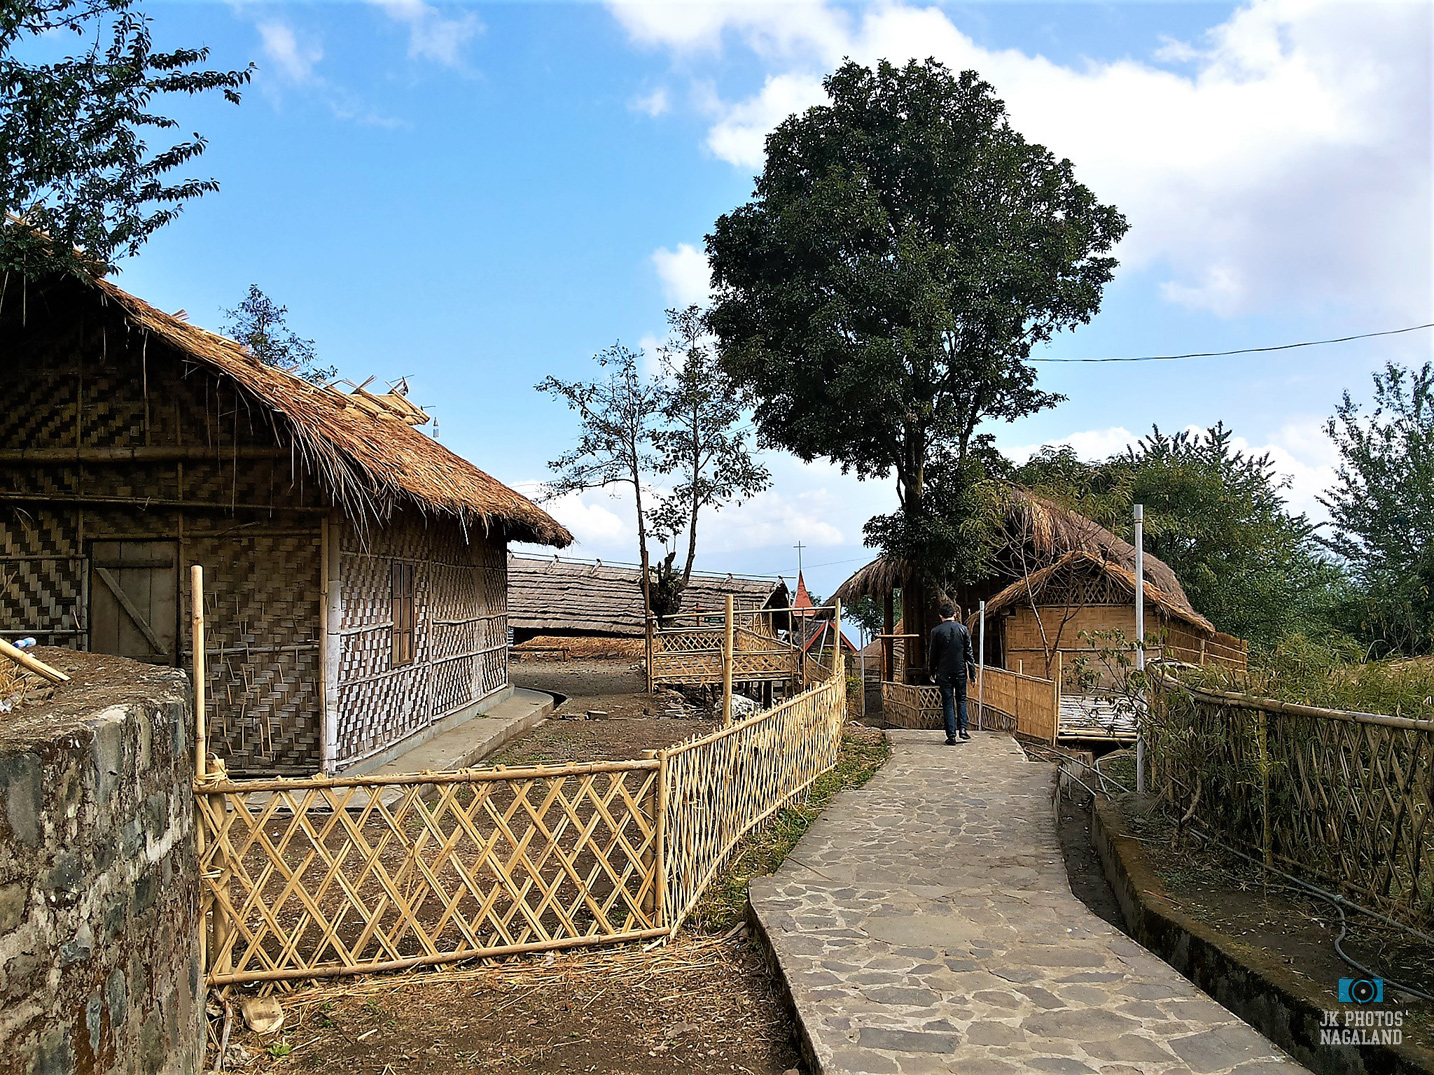 A typical Naga village with bamboo houses with a sloping thatch roof